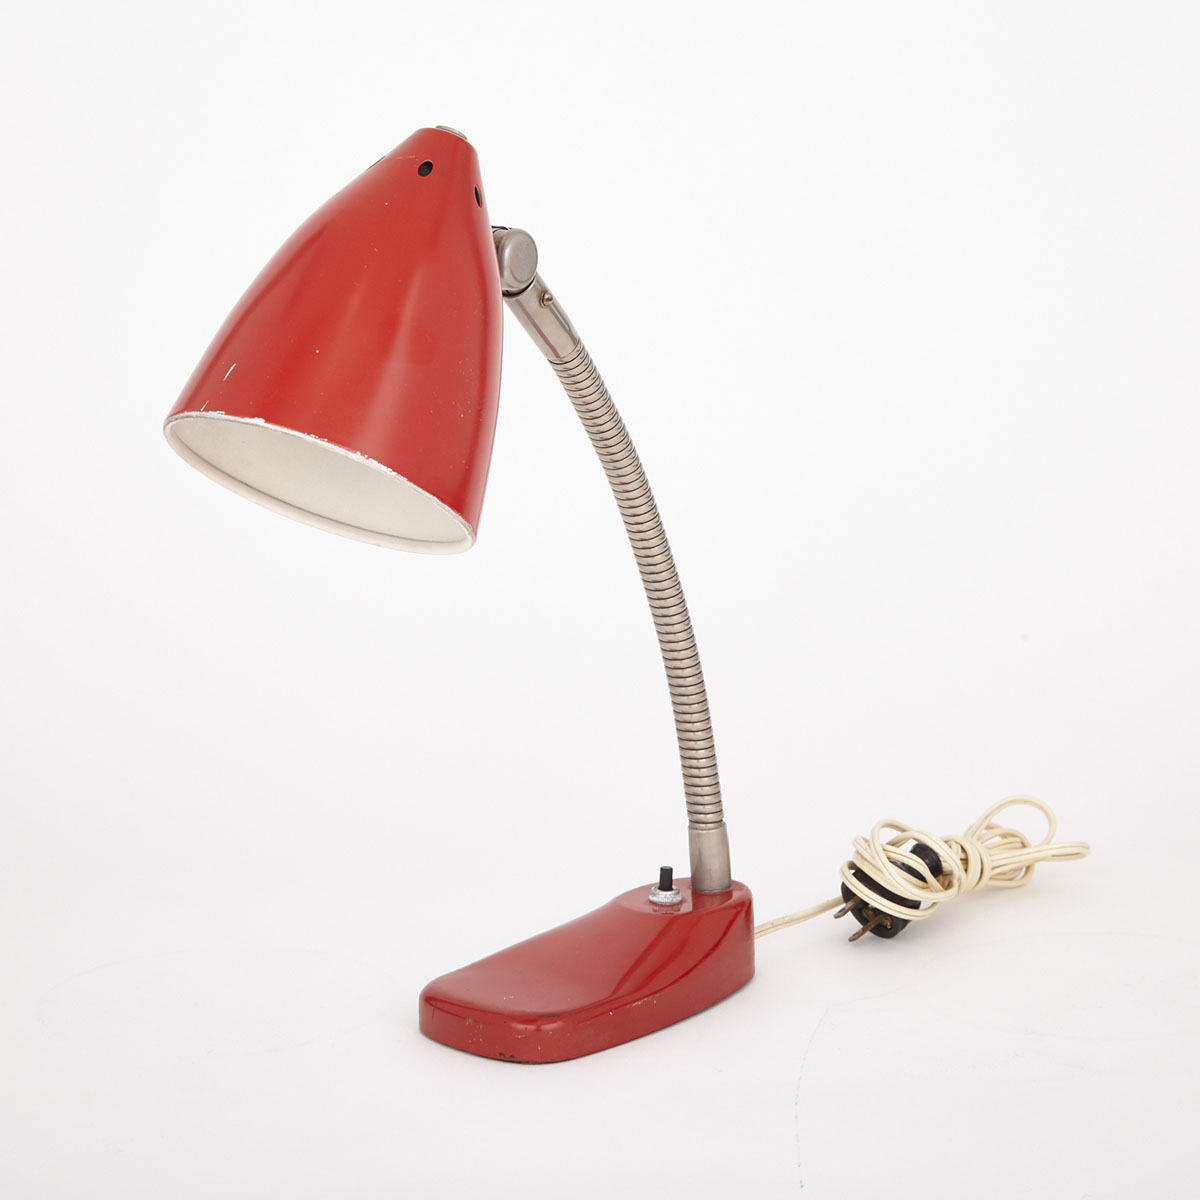 Red Lacquered Metal Gooseneck Desk Lamp, mid 20th century